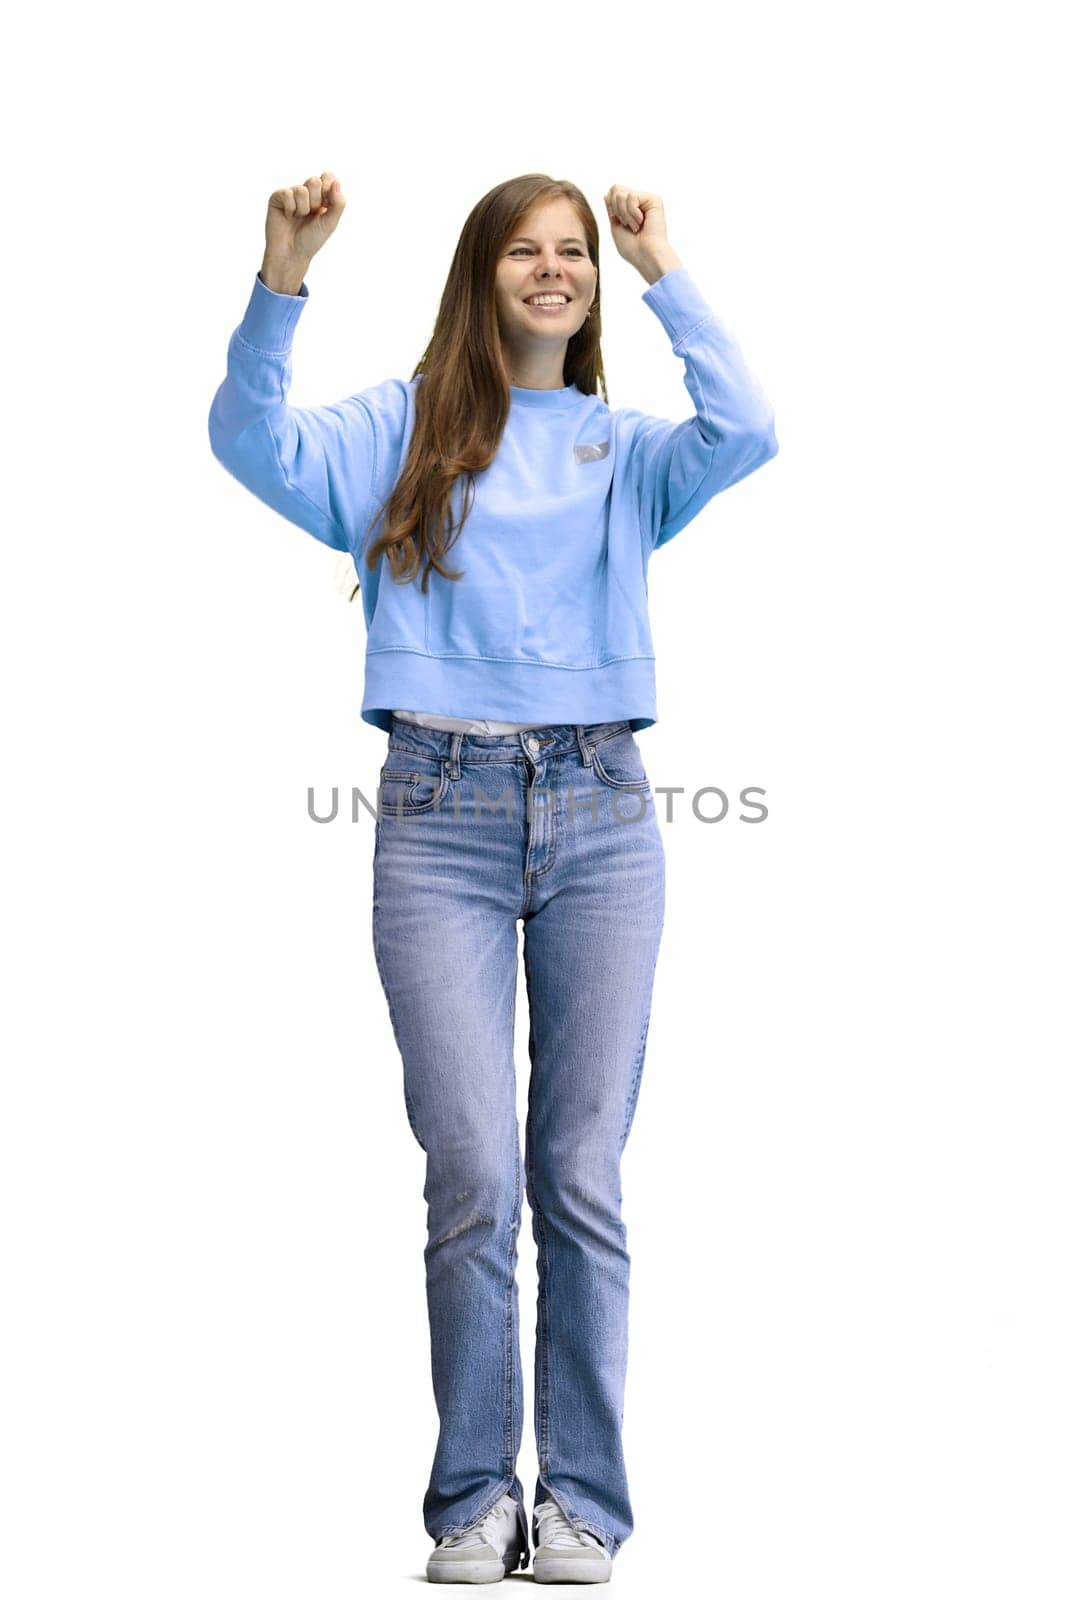 A woman, full-length, on a white background, dancing by Prosto